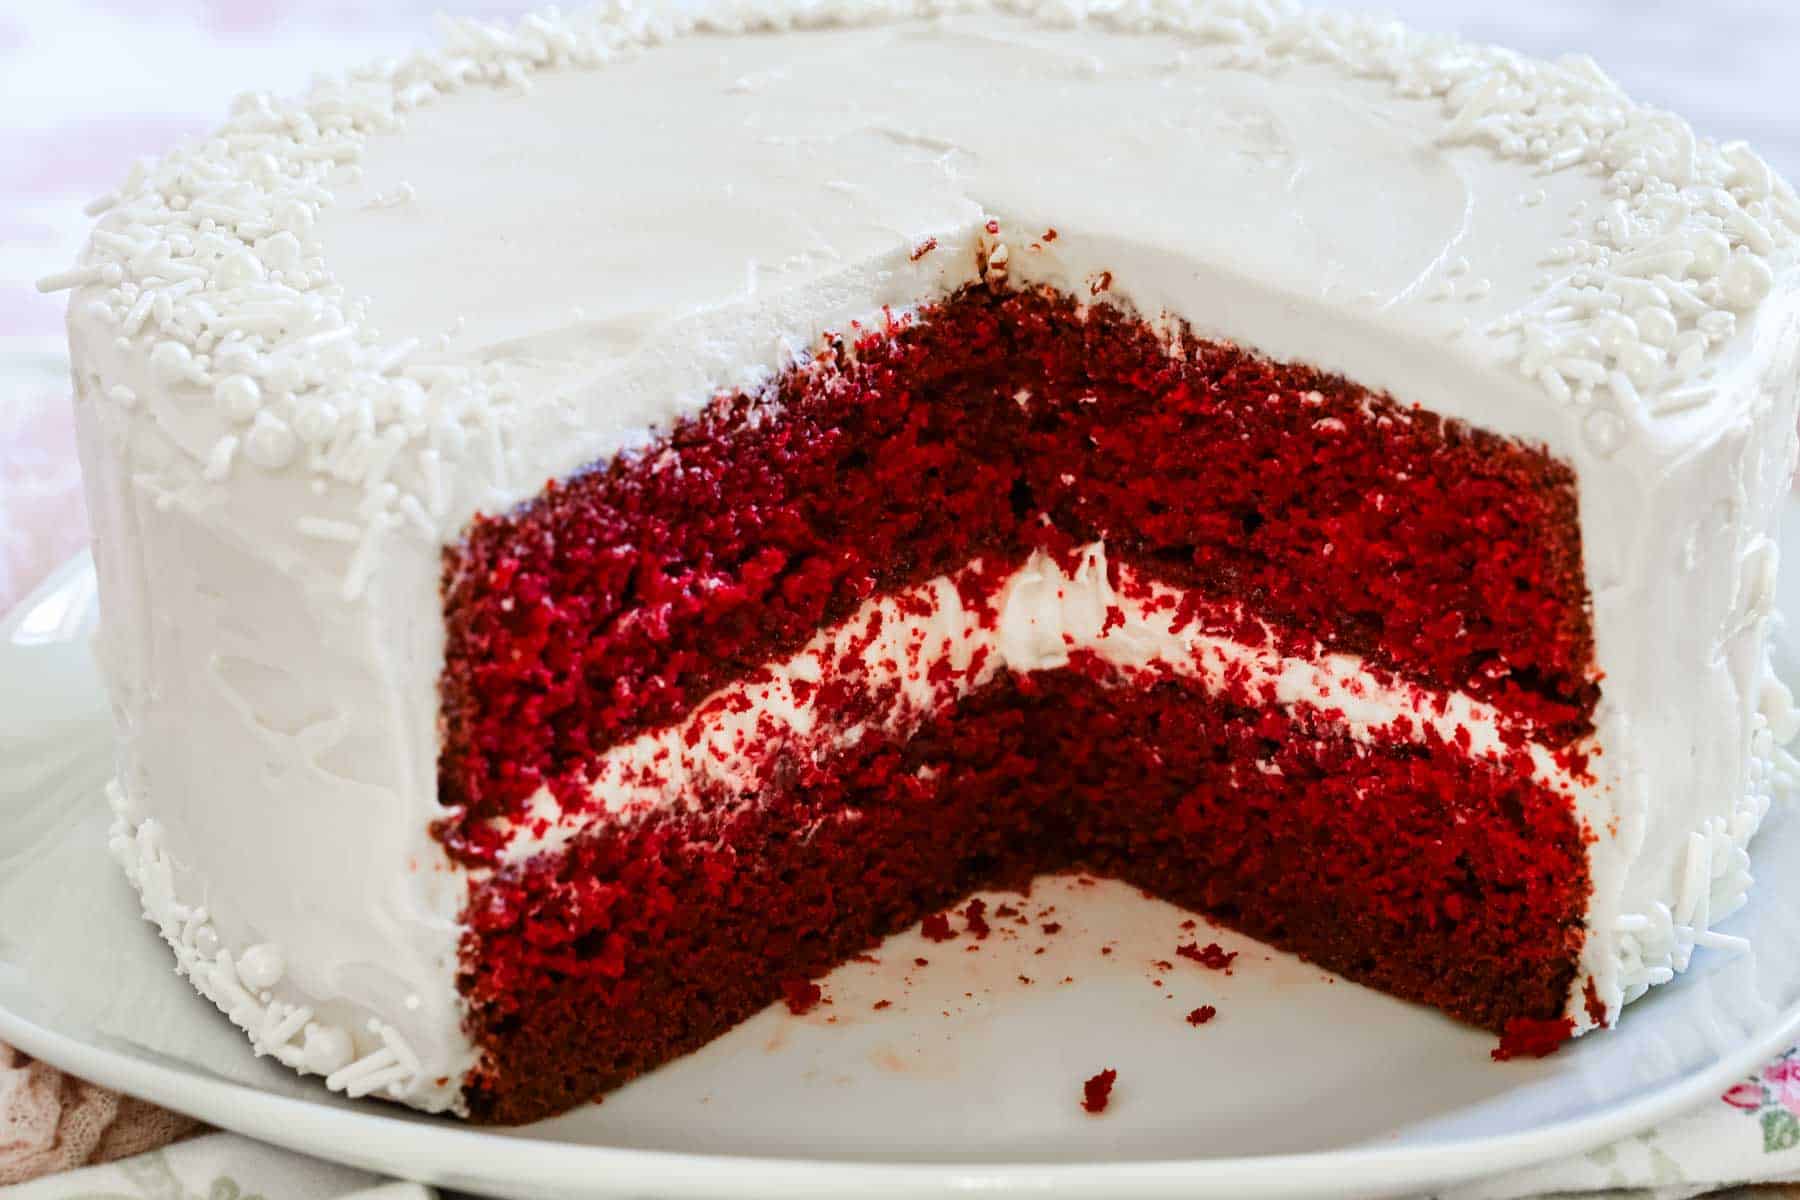 A two-layer gluten-free red velvet cake frosted with cream cheese frosting, with a large slice missing.